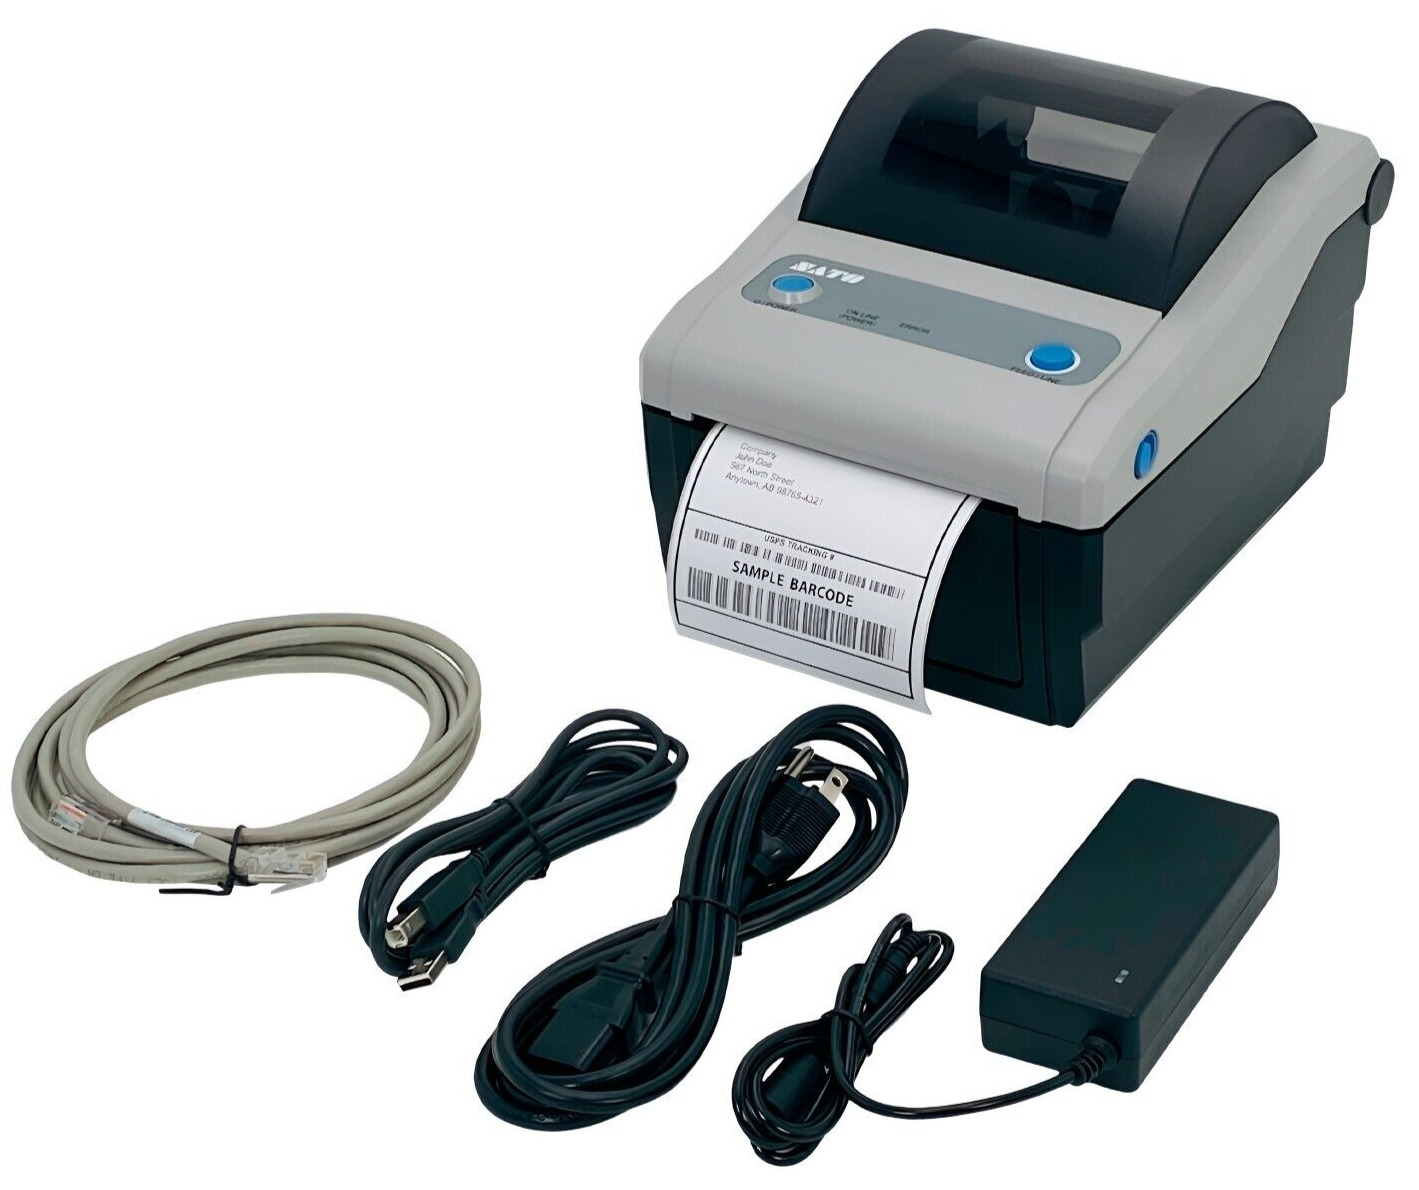 SATO CG412DT Easy-to-Use Direct Thermal 4x6 Home Business Label Printer LAN USB